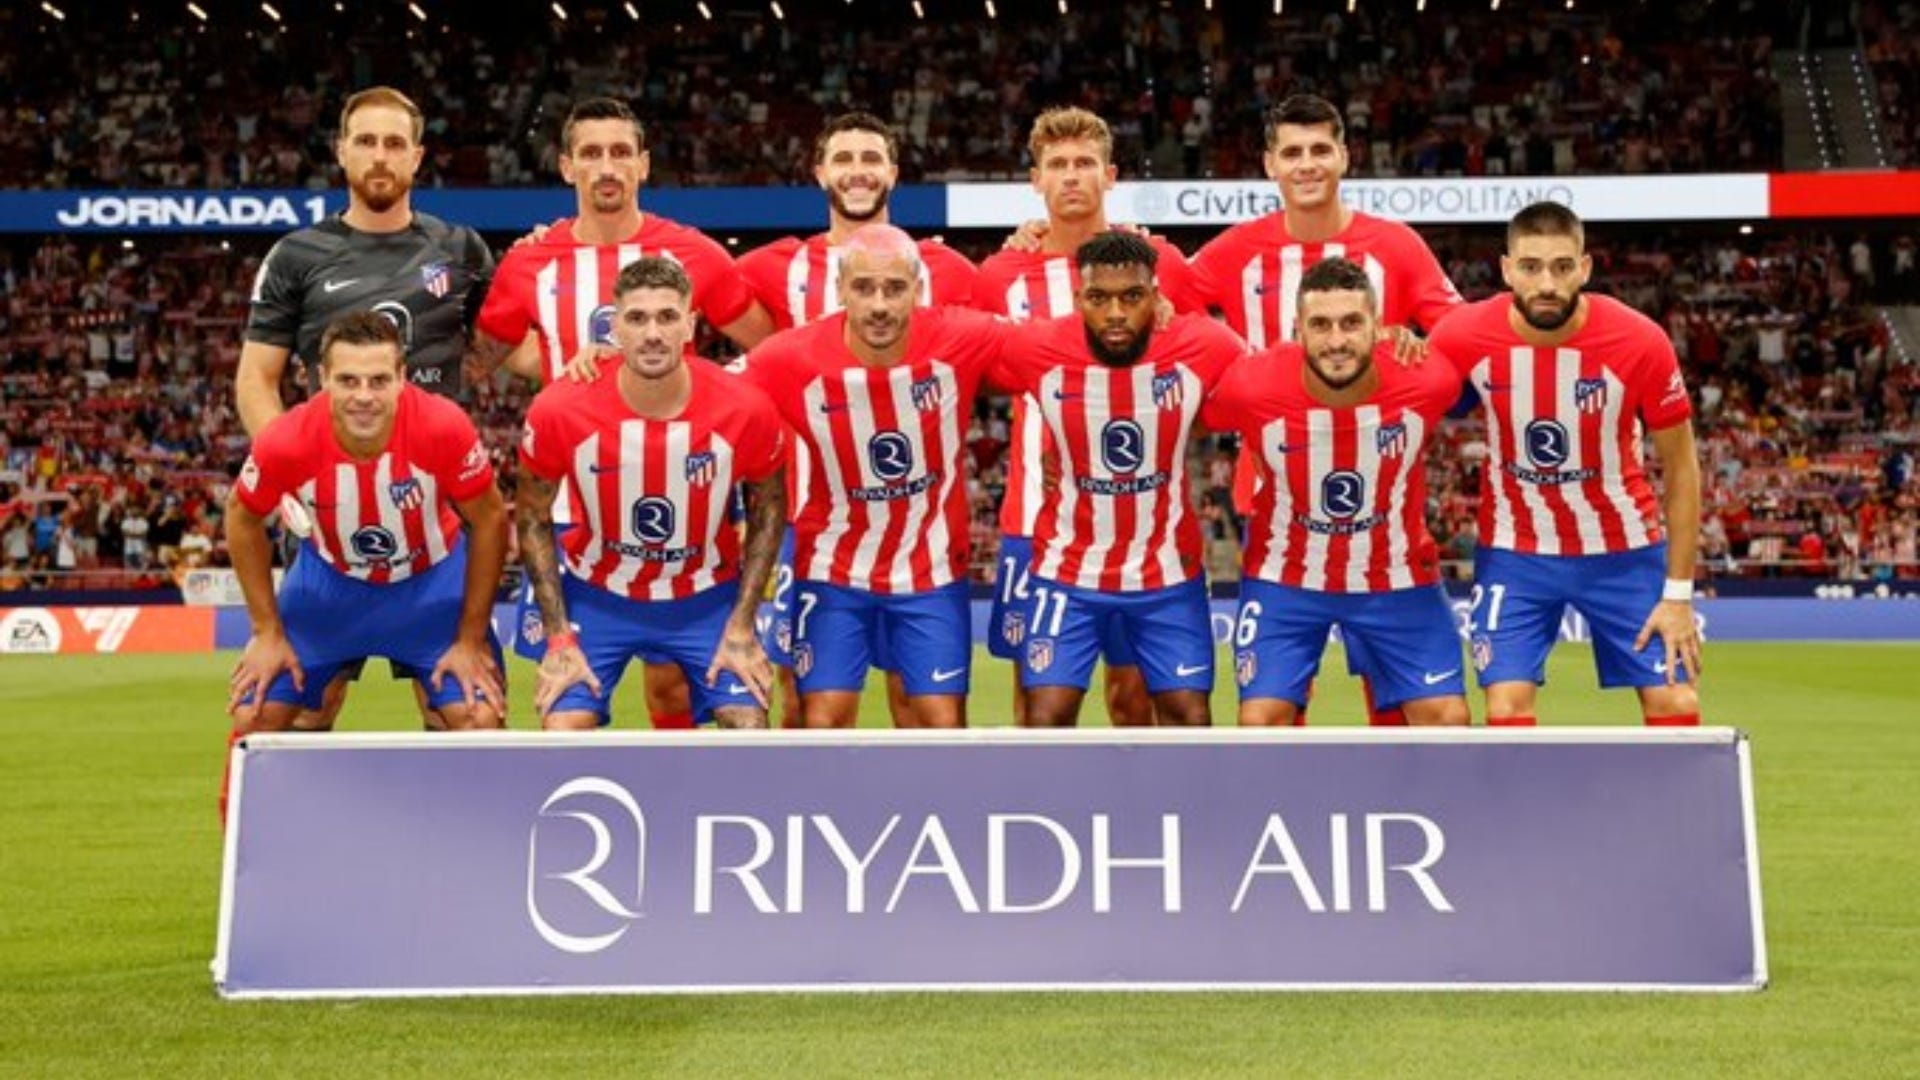 Betis vs Atlético: Where to watch the match online, live stream, TV channels, and kick-off time